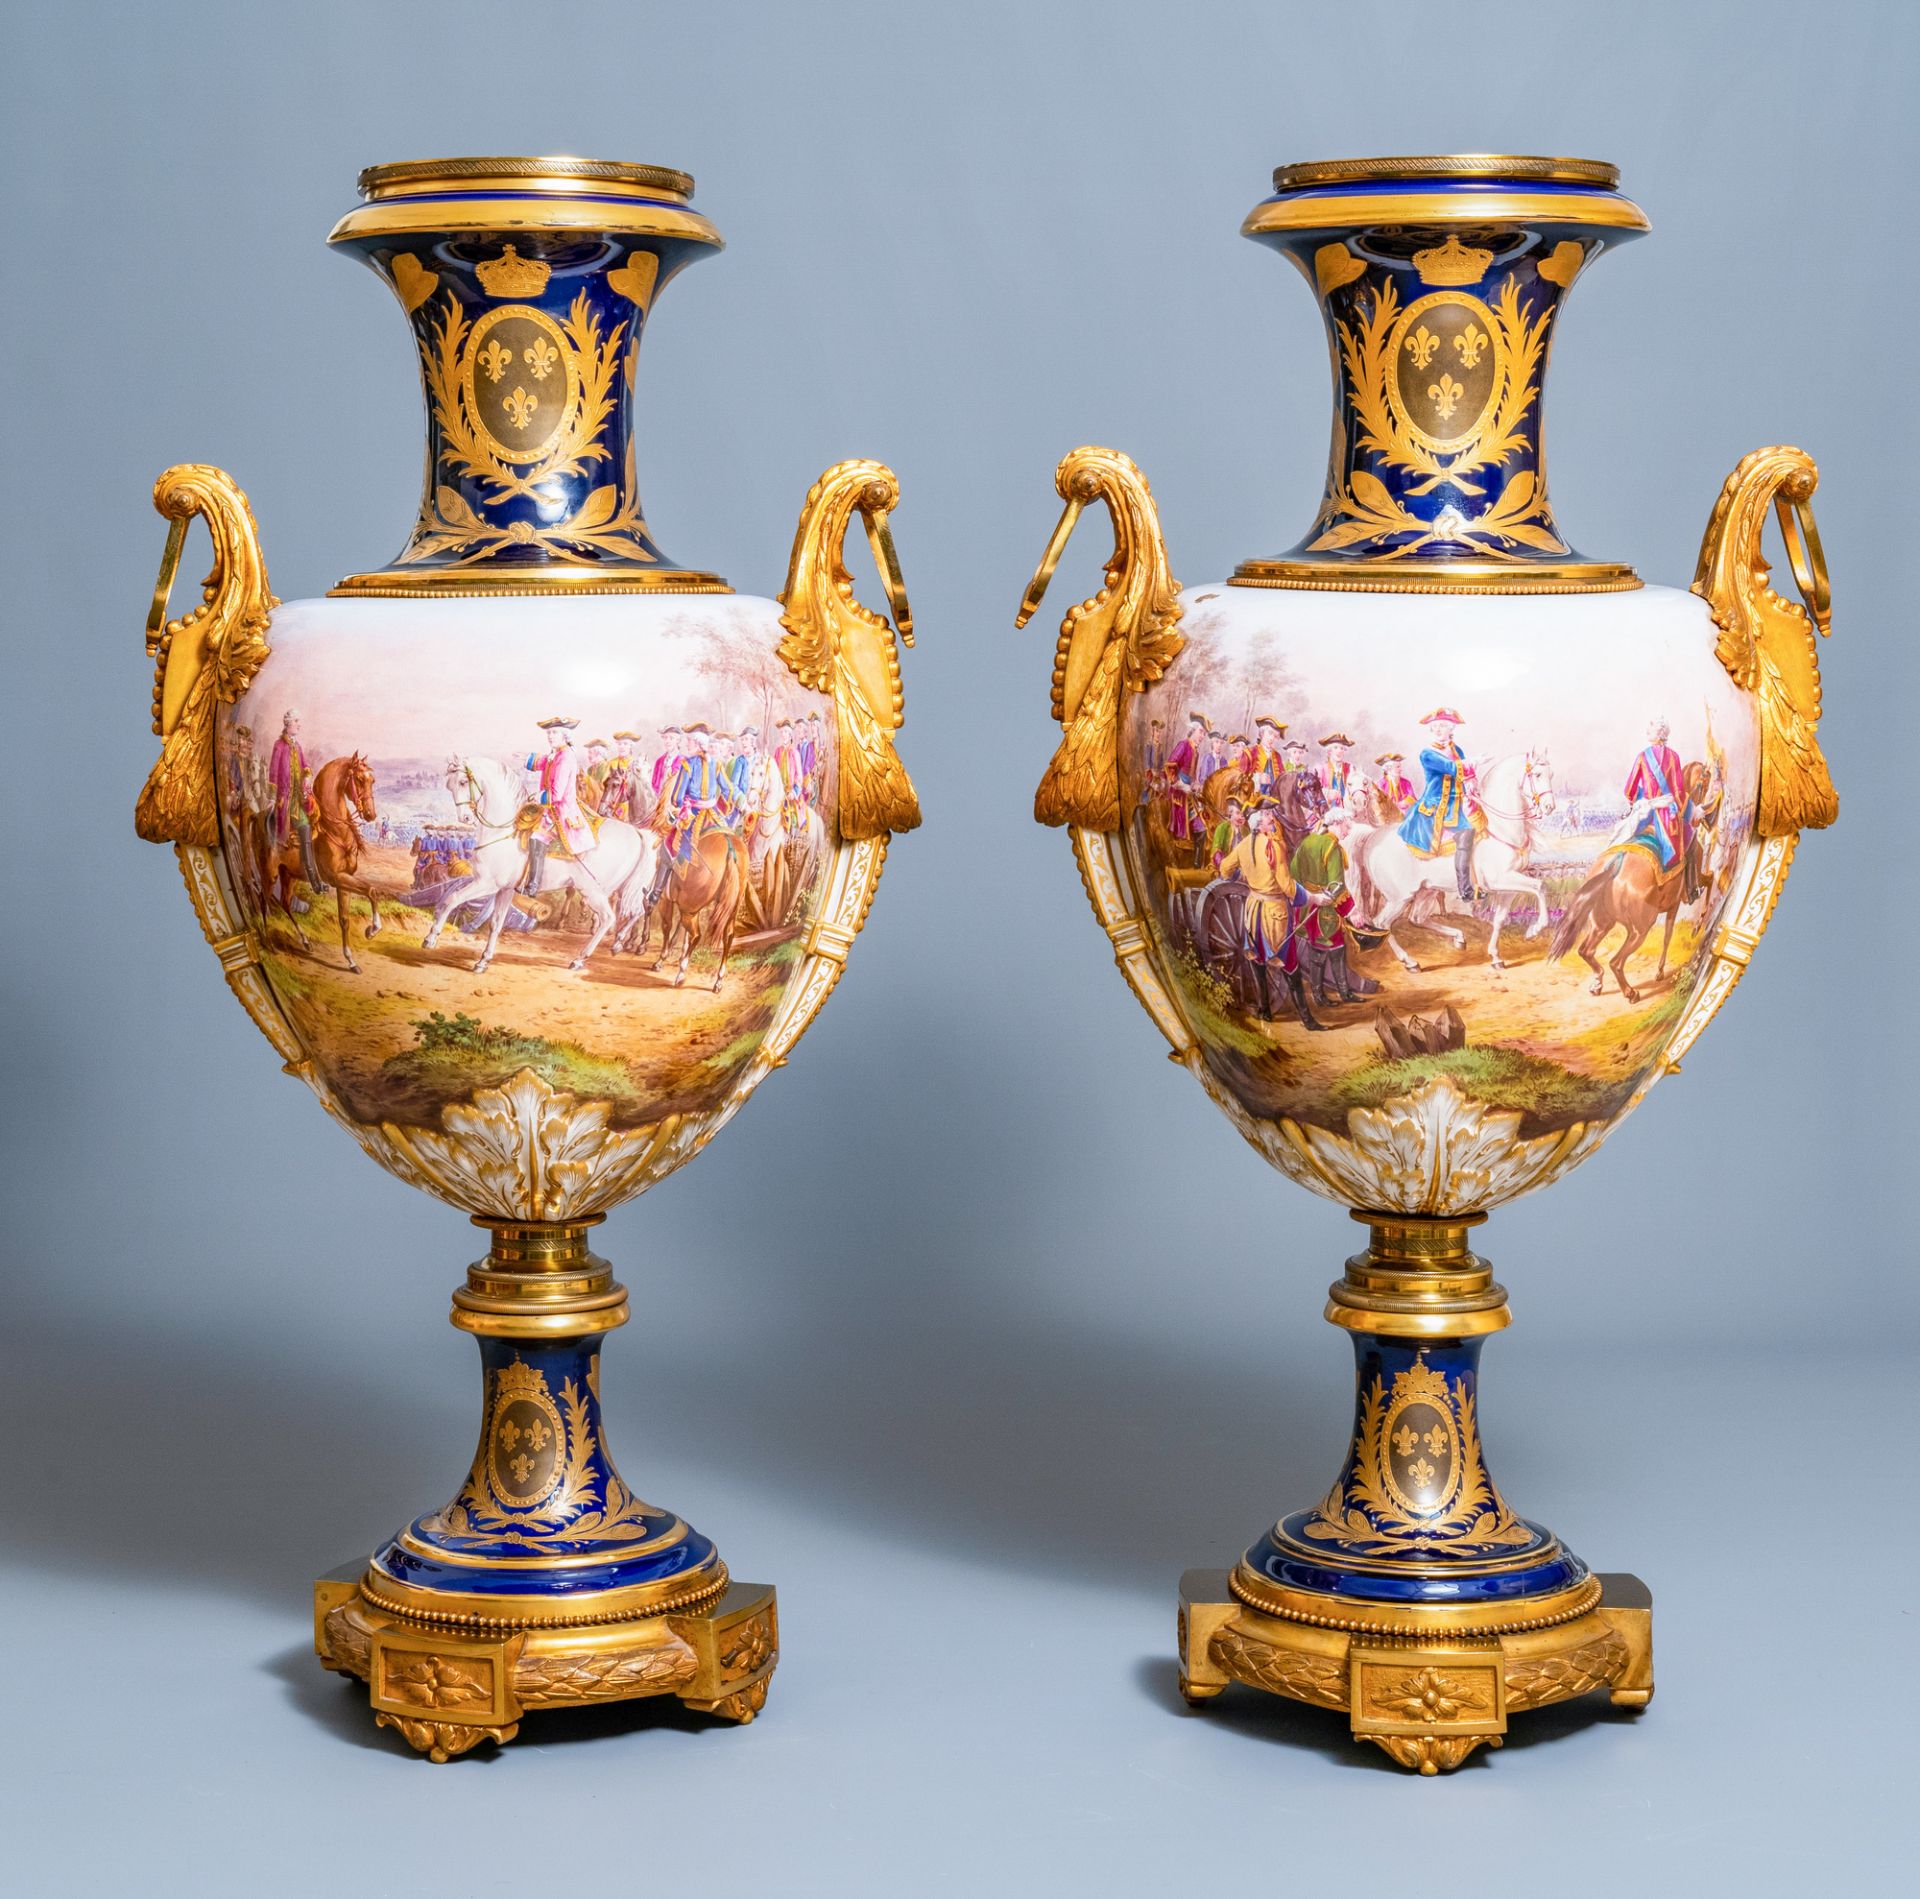 A pair of massive French Svres-style vases with gilded bronze mounts, signed Desprez, 19th C. - Image 2 of 56